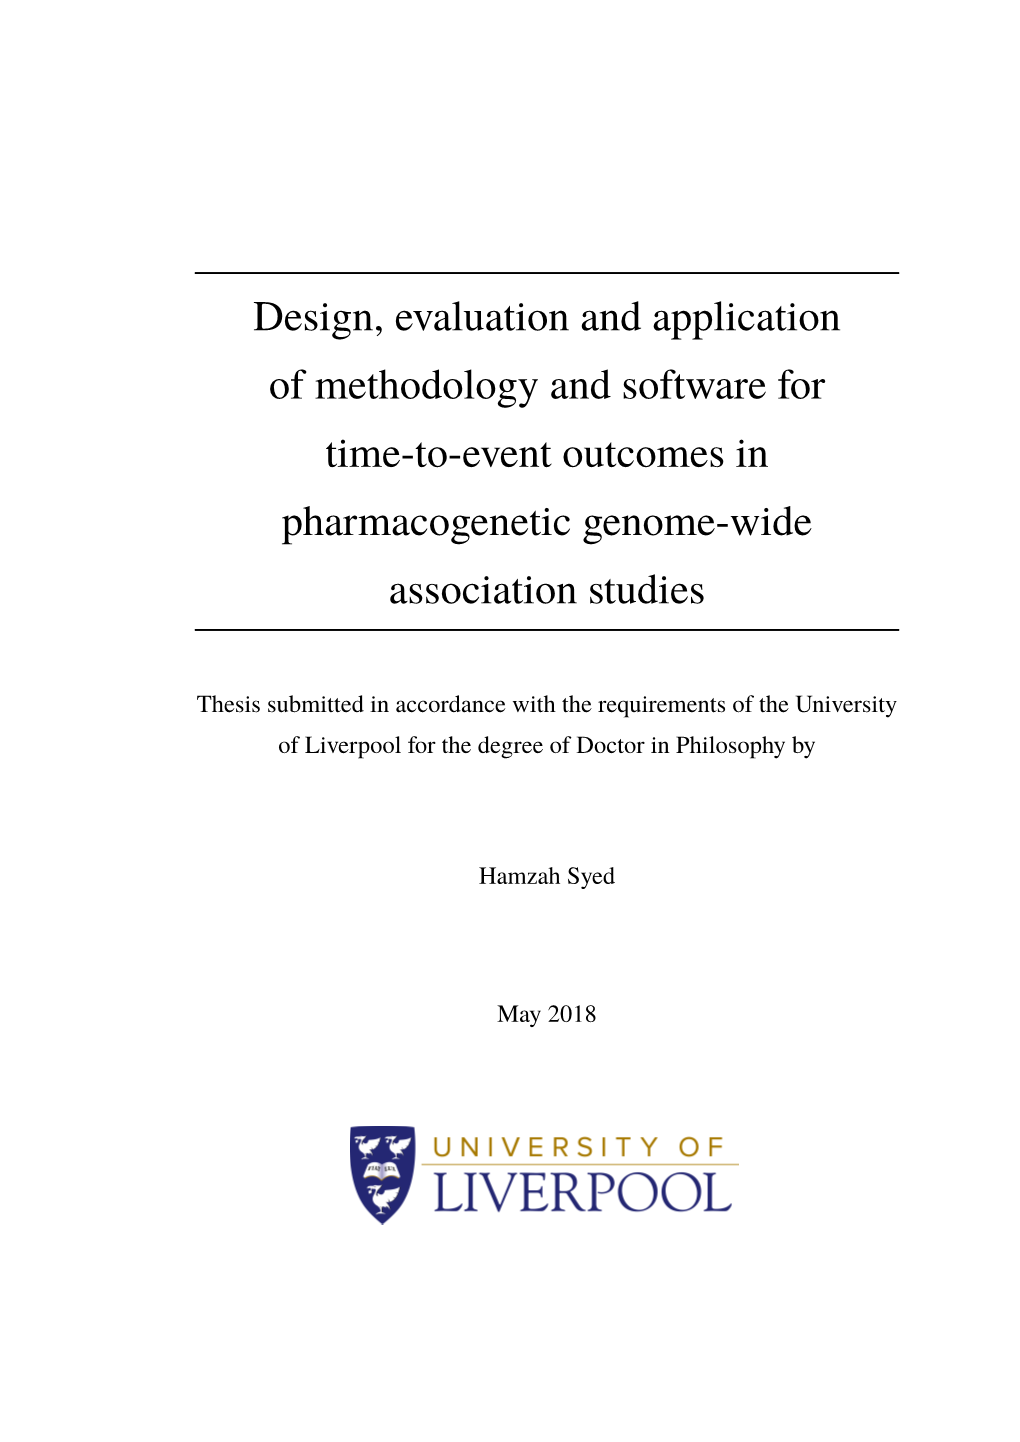 Design, Evaluation and Application of Methodology and Software for Time-To-Event Outcomes in Pharmacogenetic Genome-Wide Association Studies